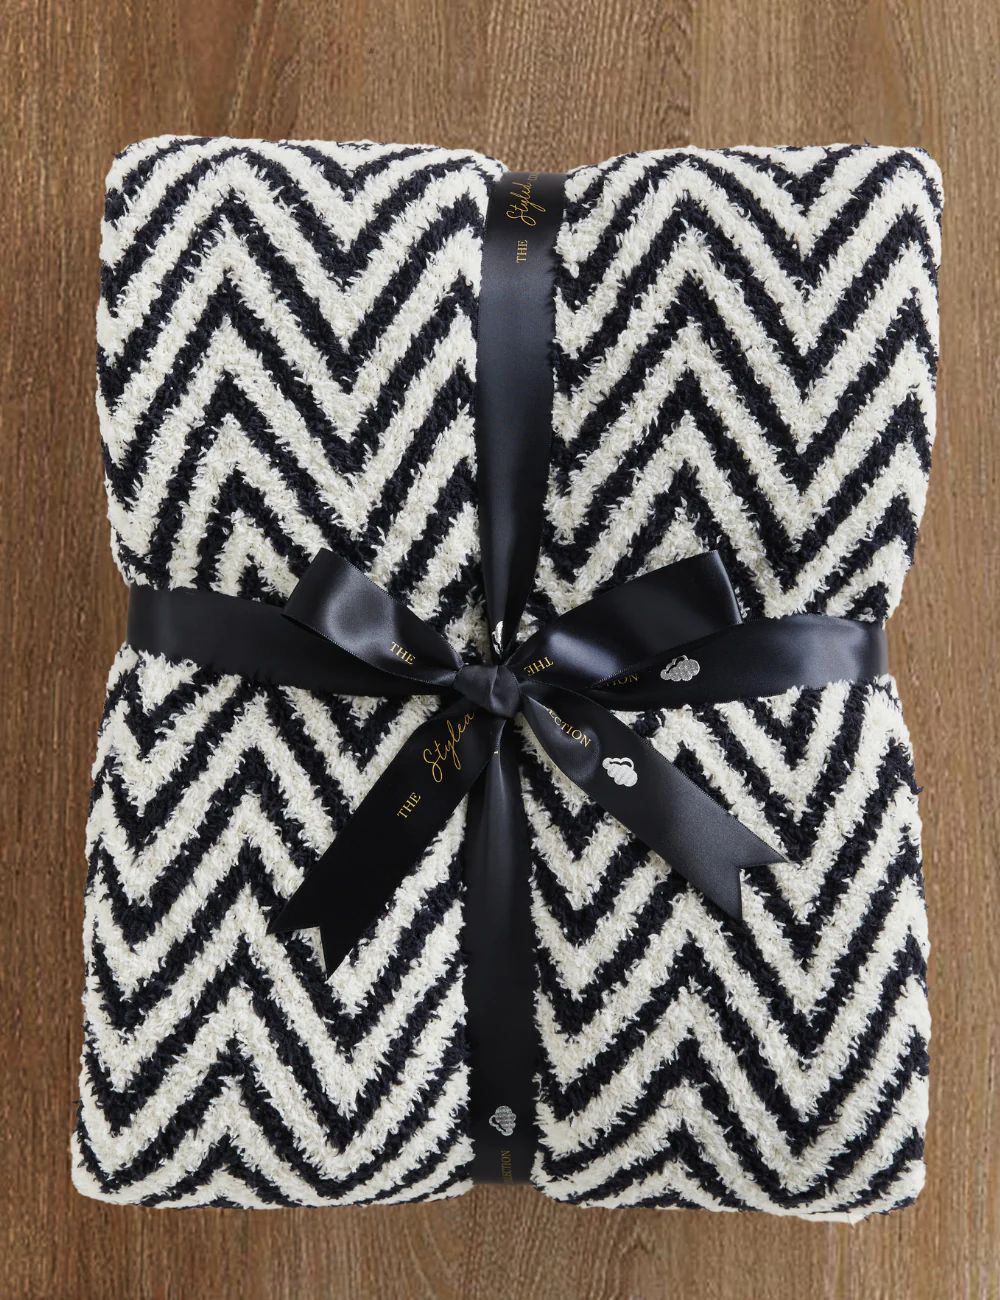 Chevron Buttery Blanket | The Styled Collection